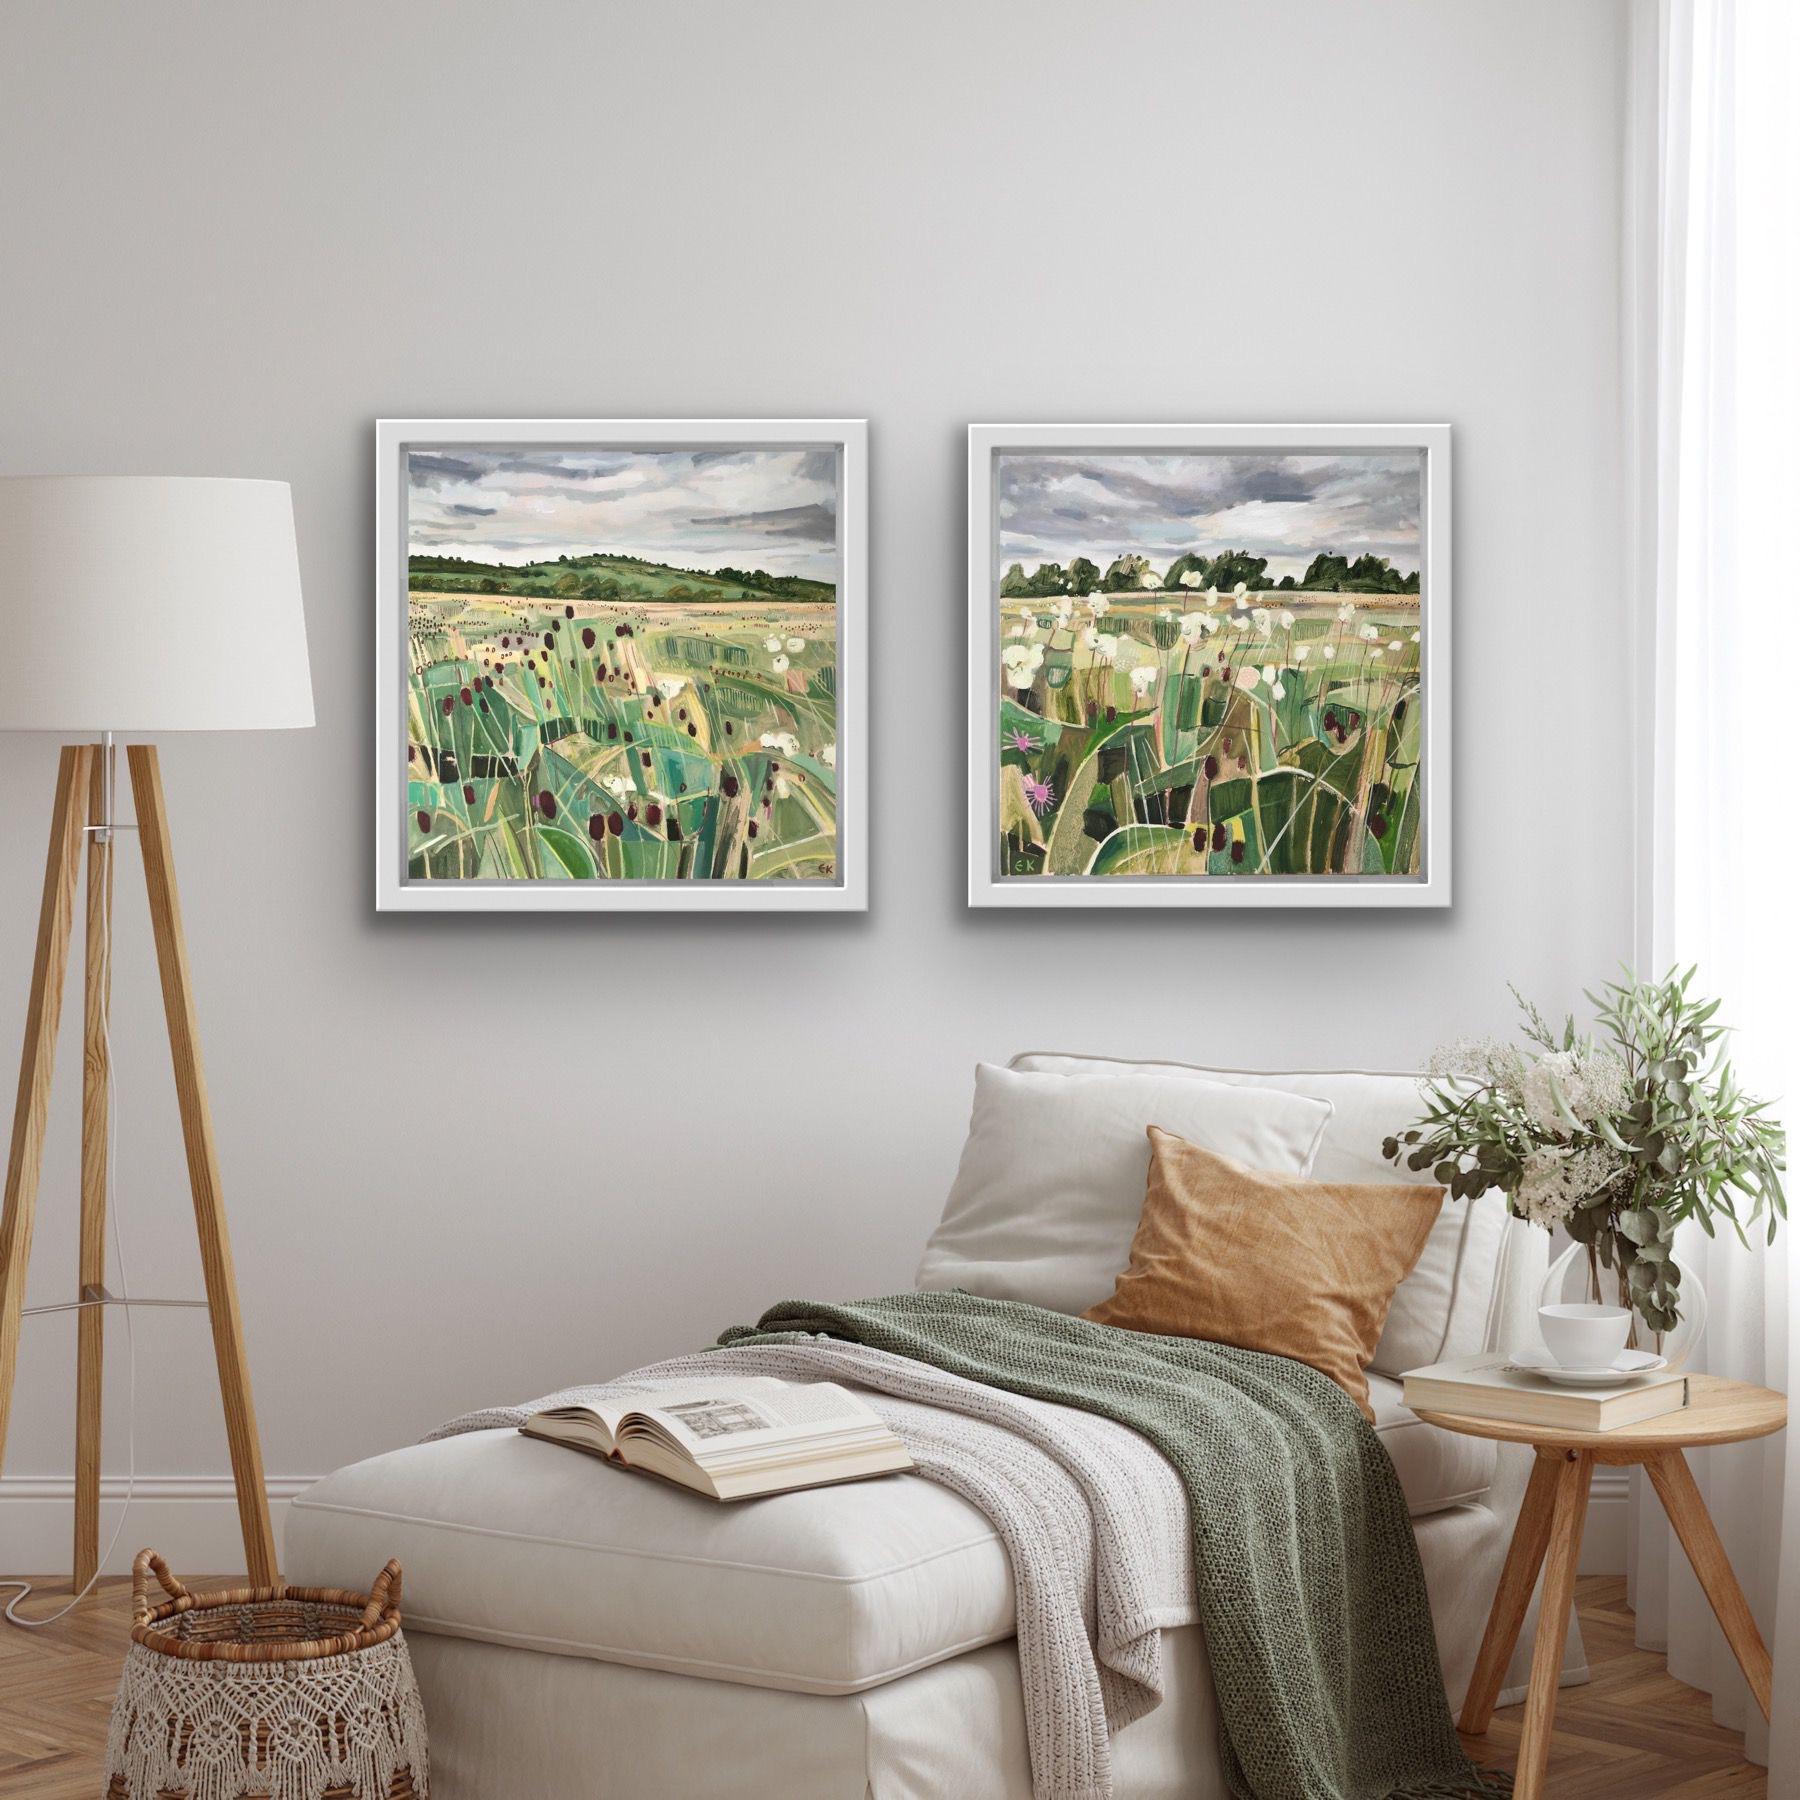 This work comprises a pair of paintings of a meadow called Long Mead, which create a diptych. Although the paintings could be available separately, they compliment one another when hung side by side, on opposite walls or within the same interior.